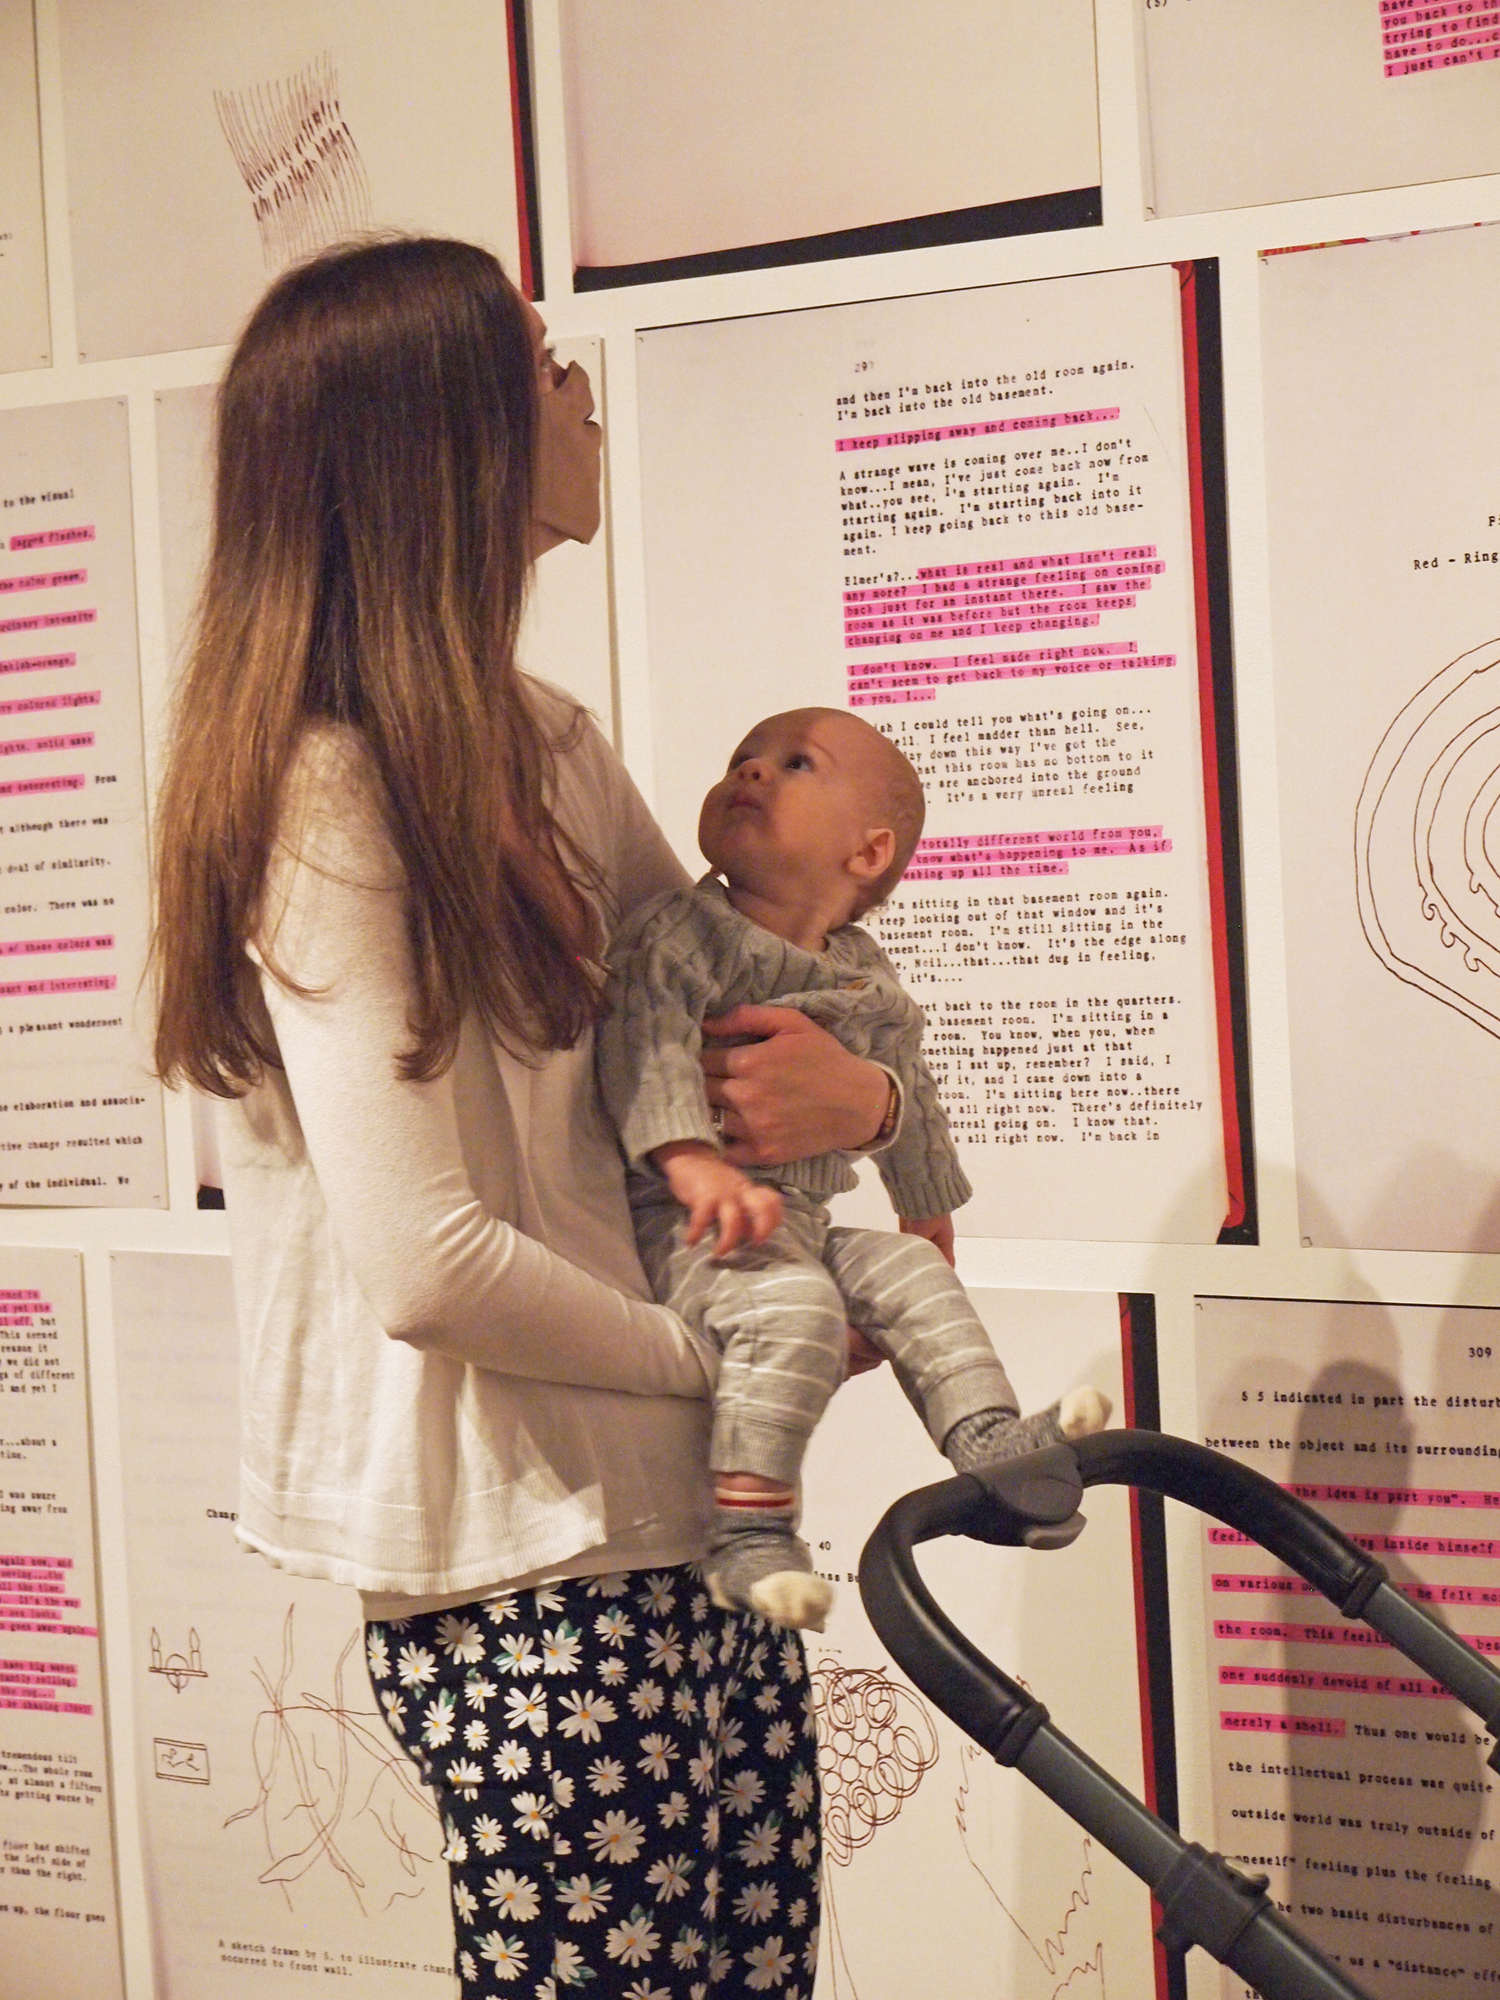 A mother holds her baby while looking at a wall filled with large text prints with pink highlighted segments